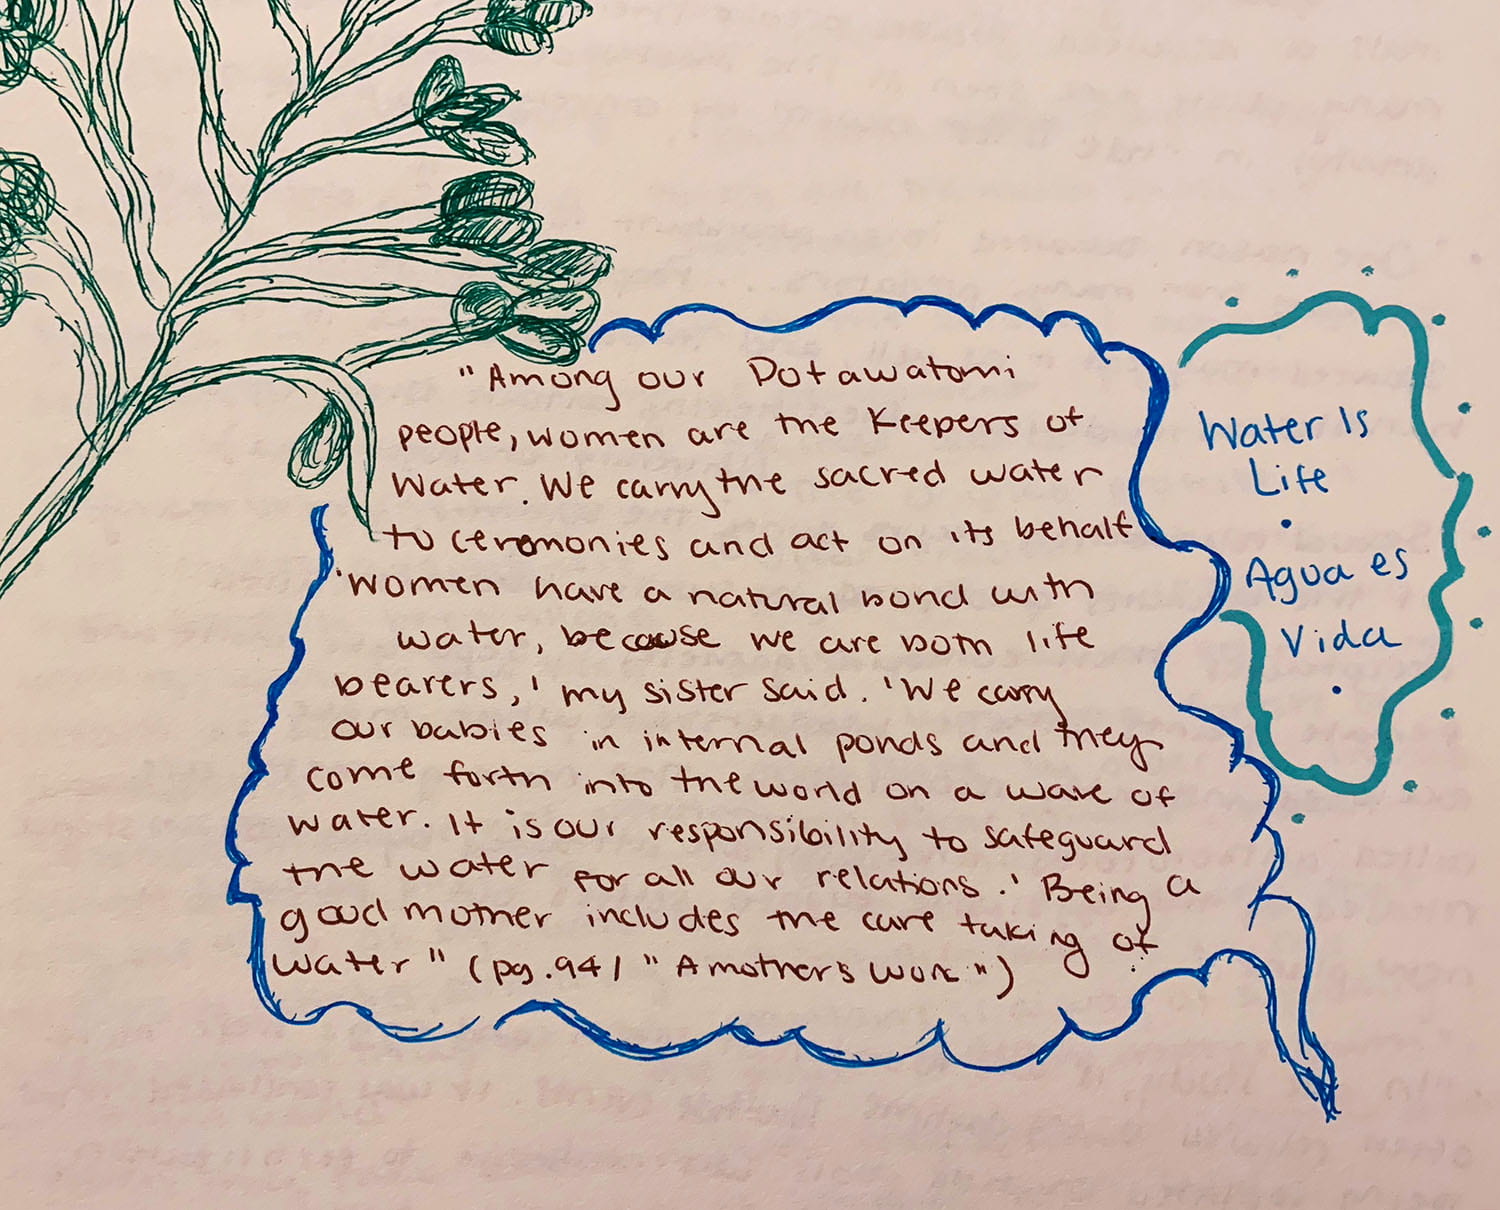 drawing of a plant next to drawn word bubbles containing handwritten notes about Dotawatoni women and their relationship with water as a life source